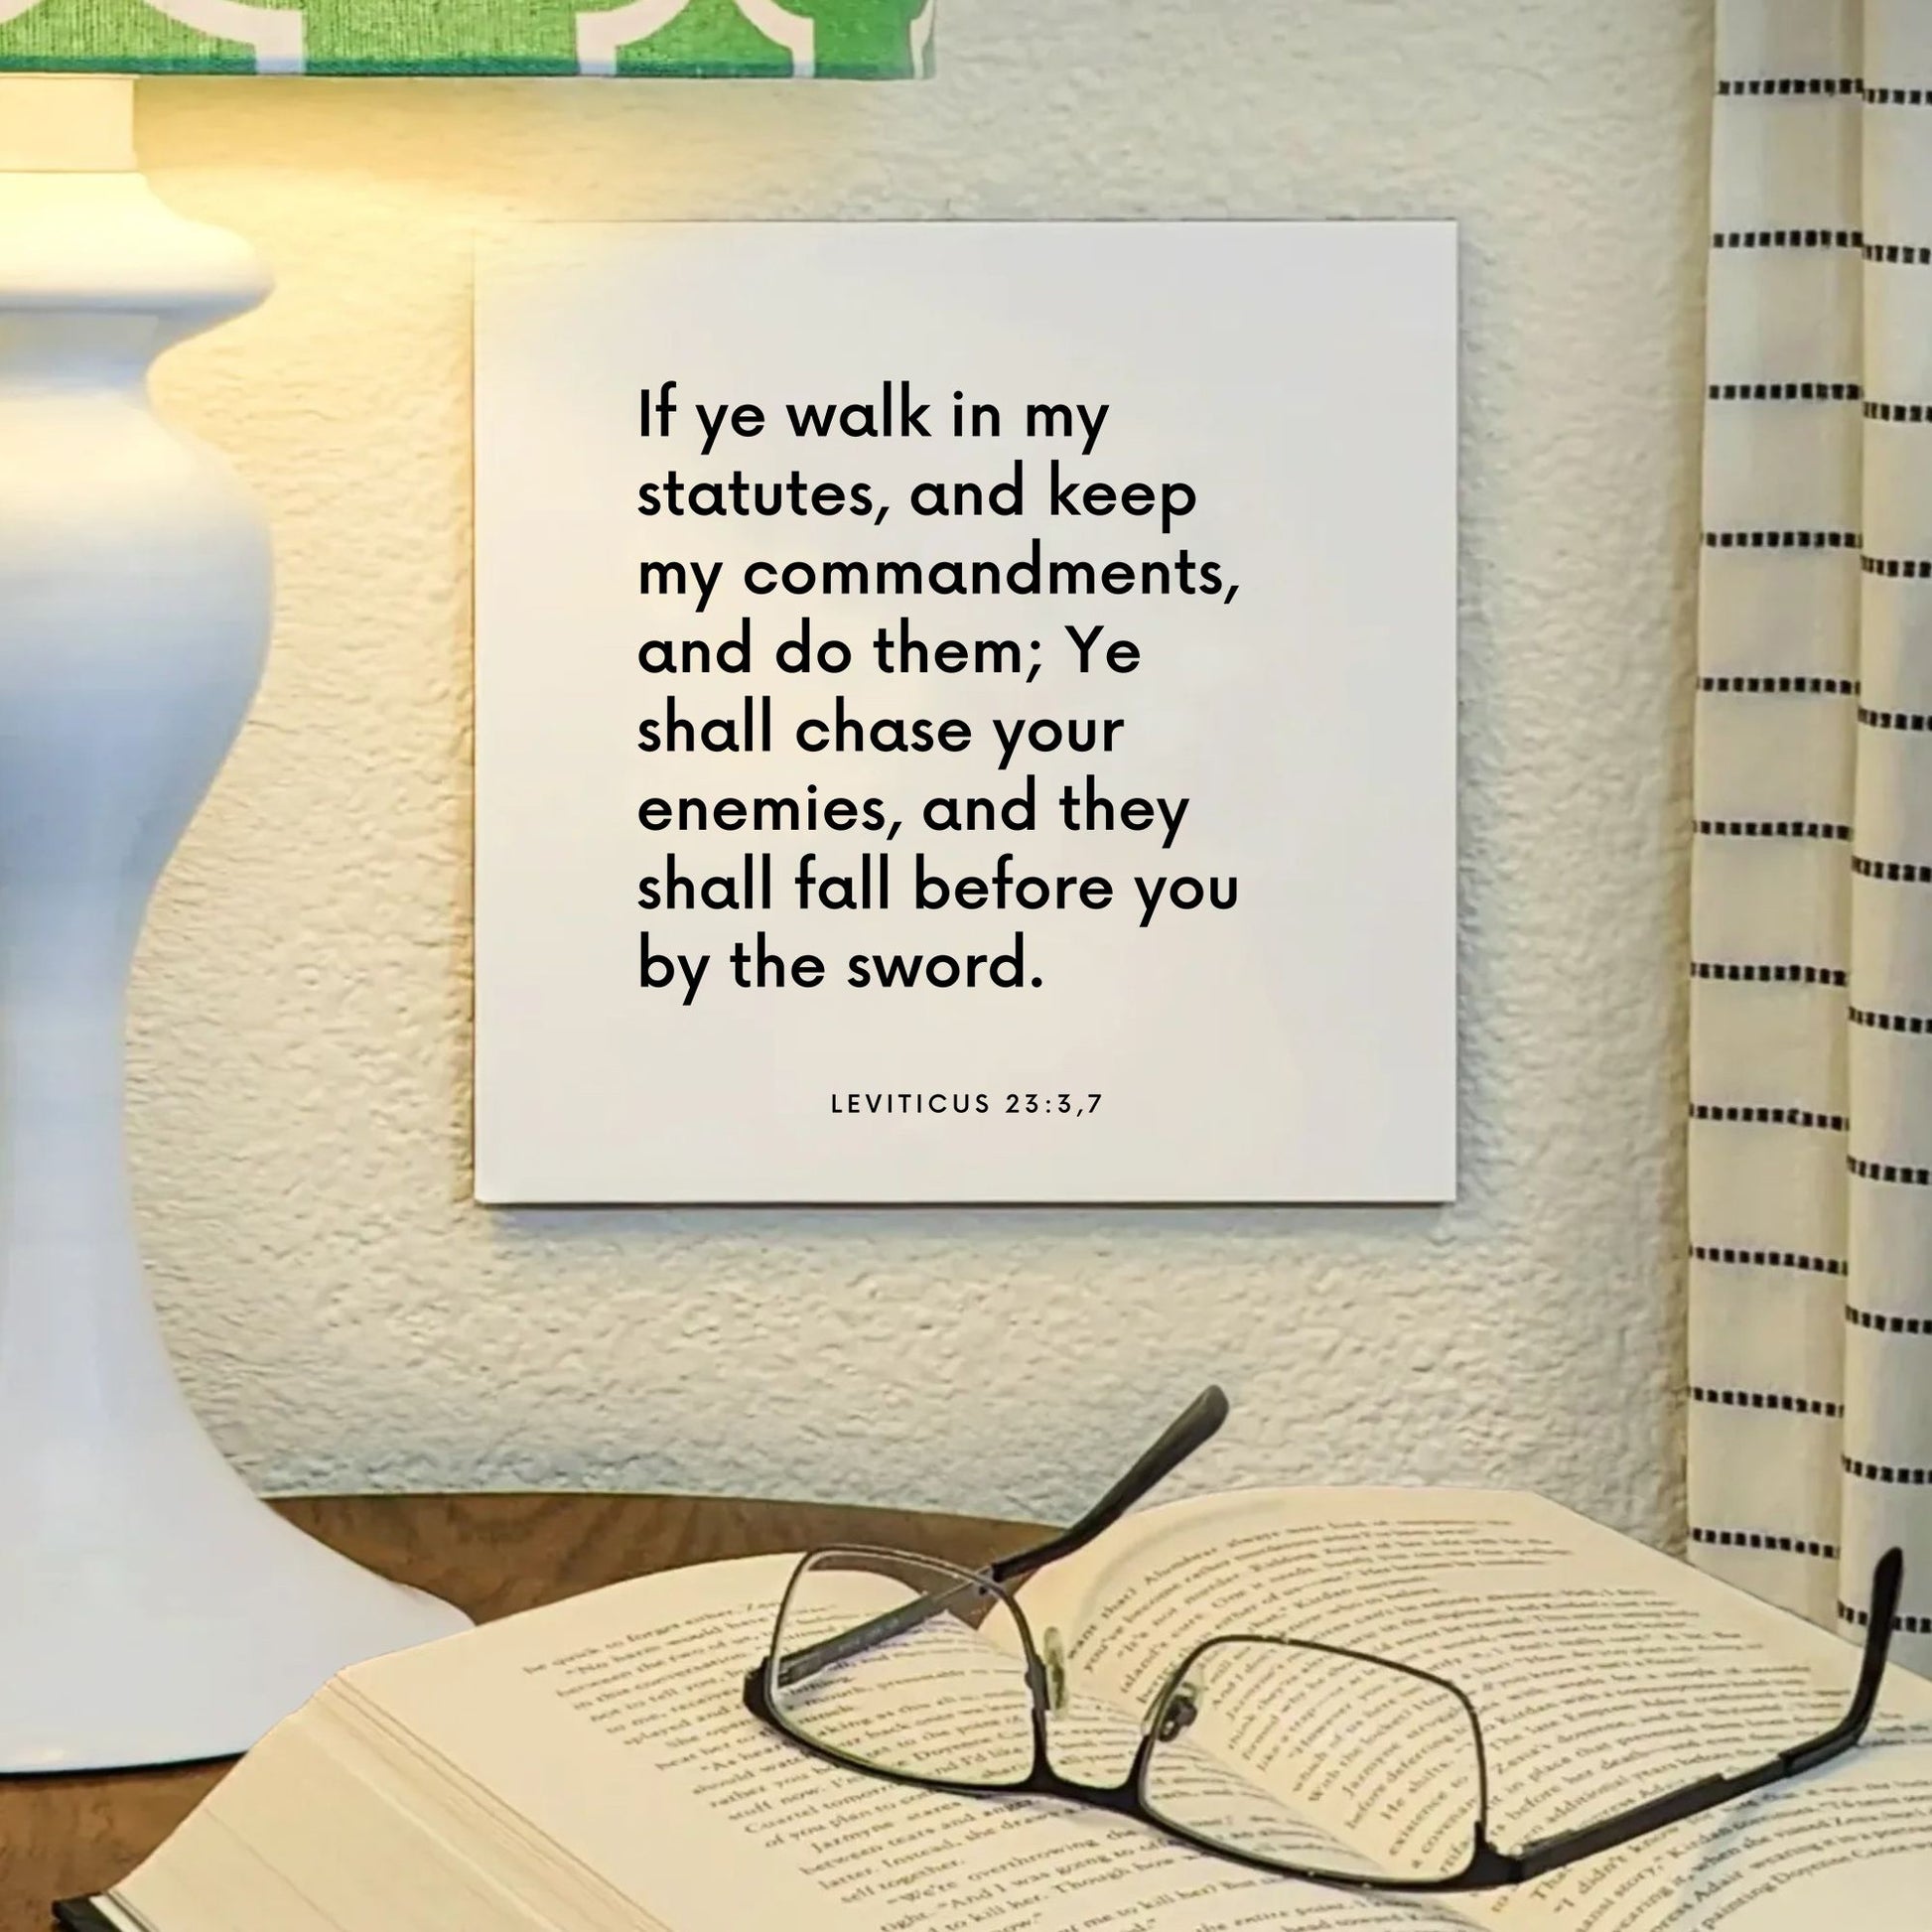 Lamp mouting of the scripture tile for Leviticus 23:3,7 - "Ye shall chase your enemies, and they shall fall before you"